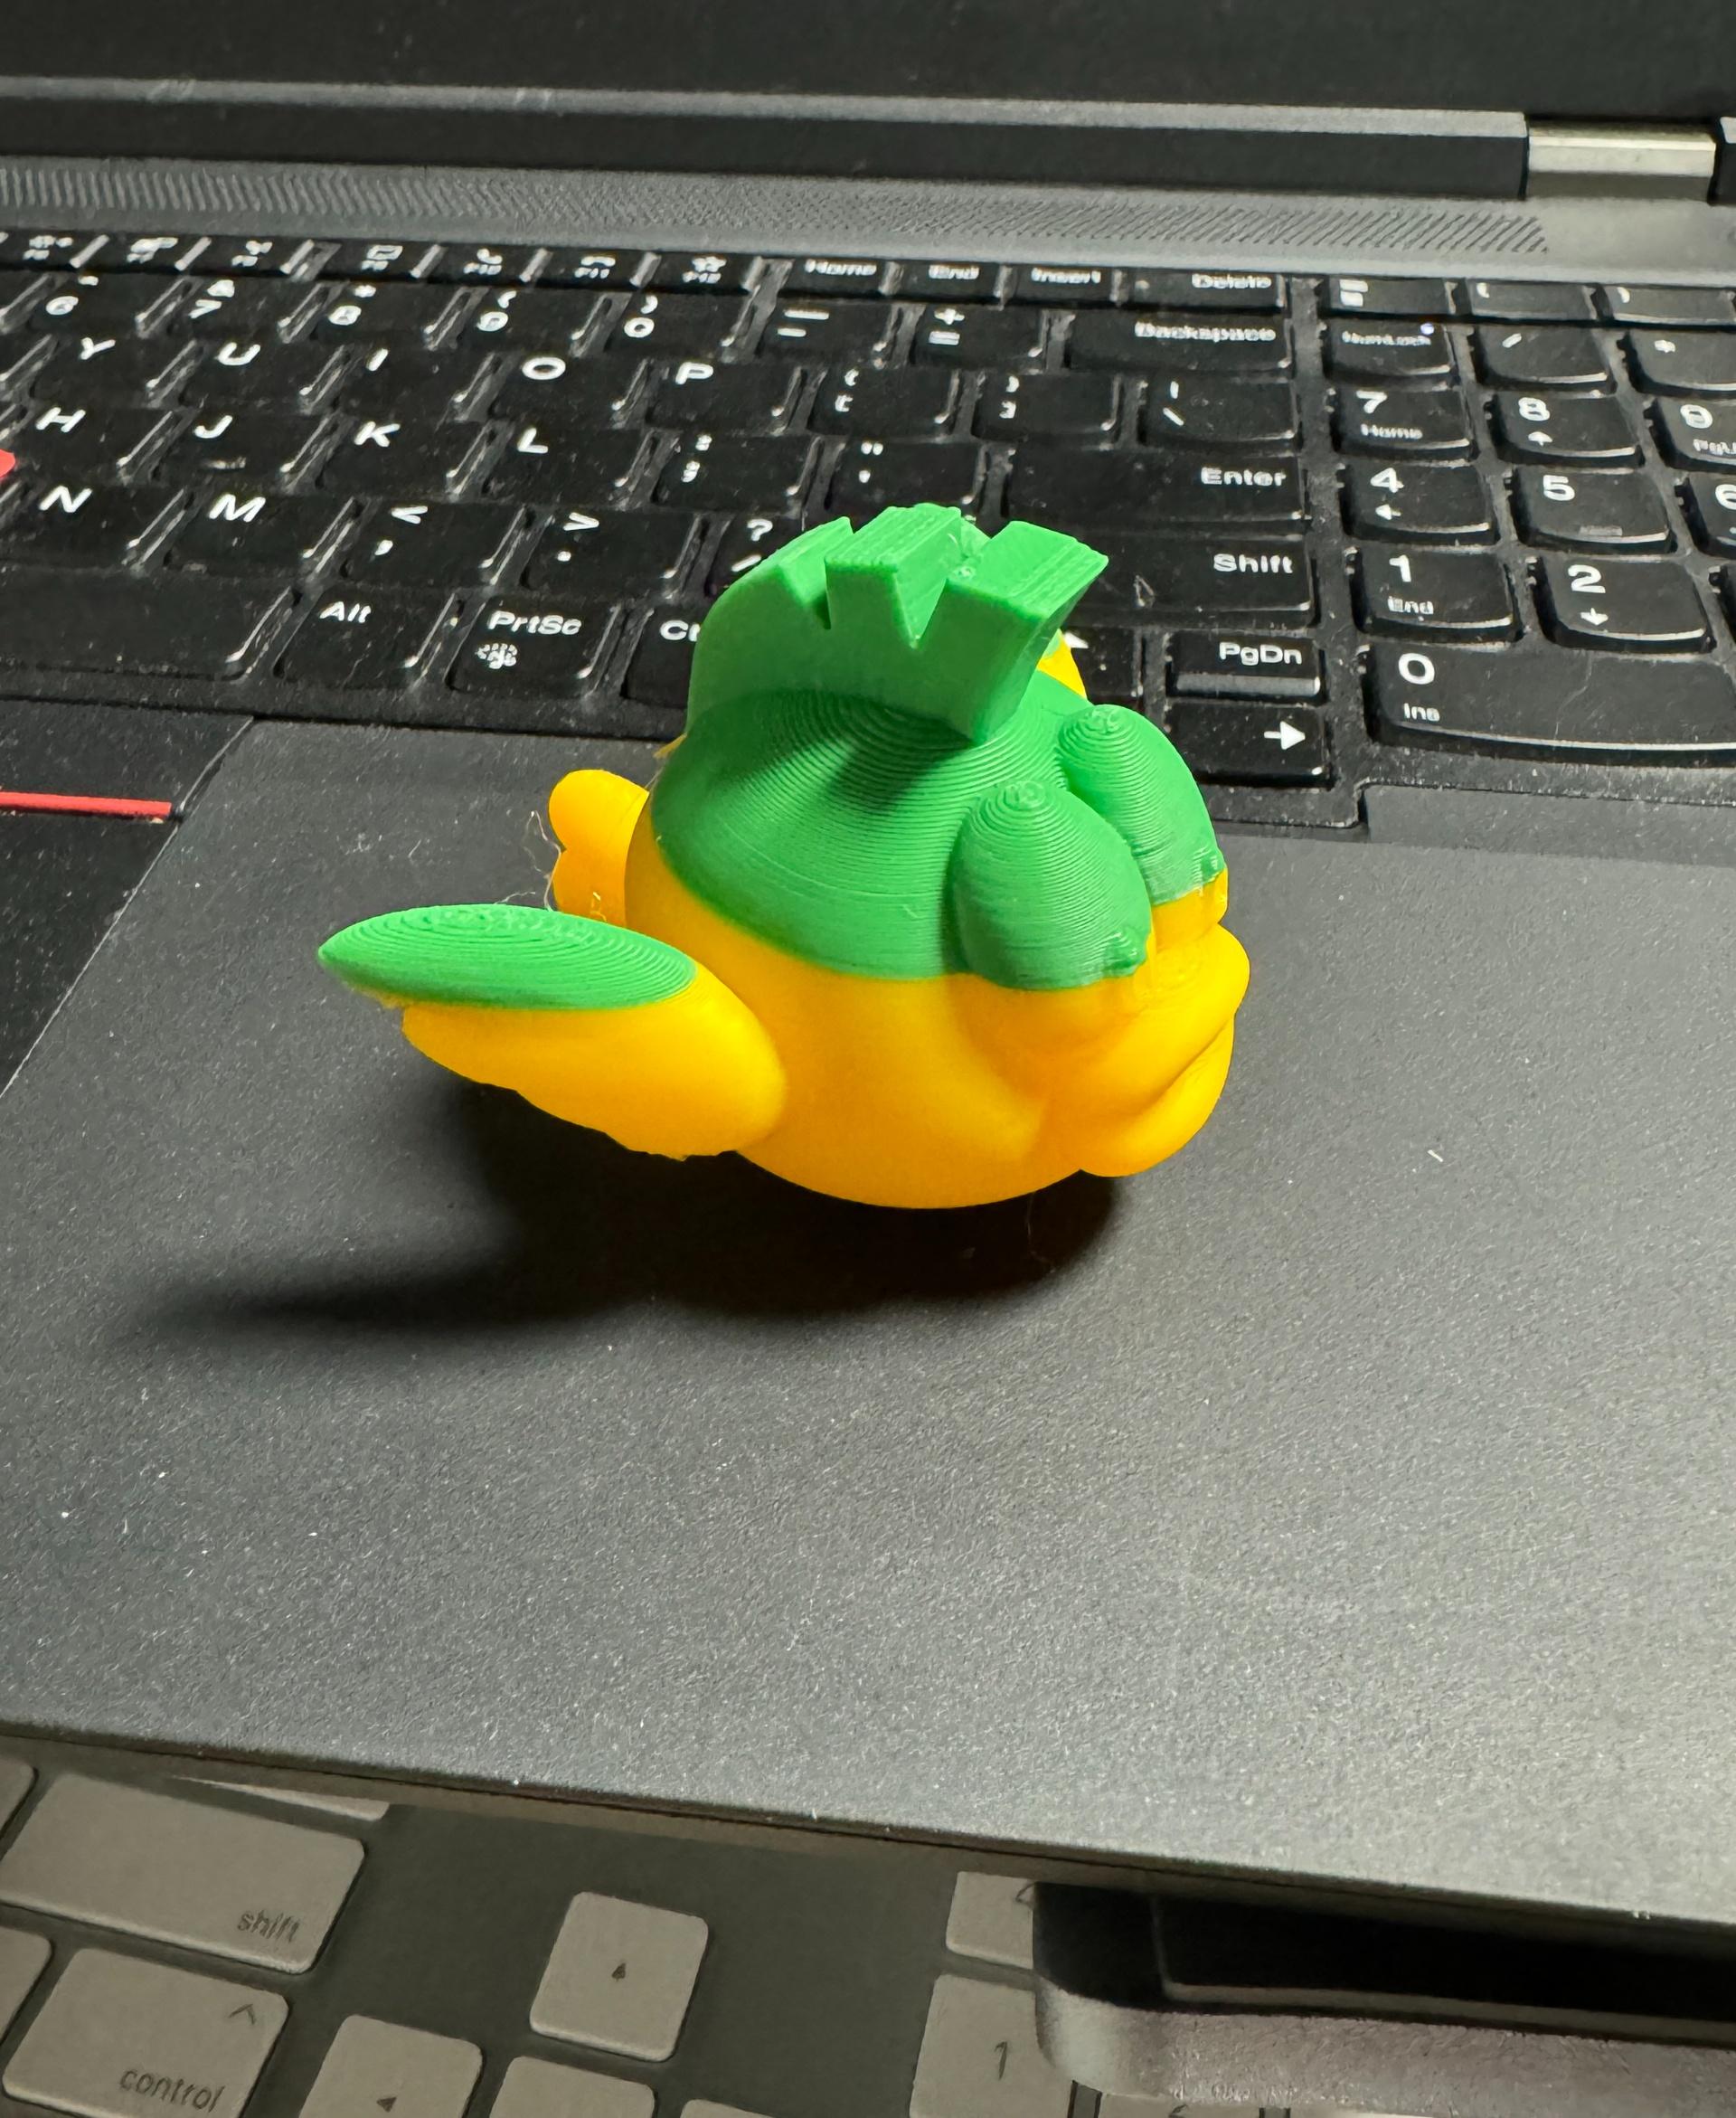 Cheep Cheep - 50% test print - I ran out of yellow, but it turned out pretty nice in the end.
Thank you for sharing your artworks! - 3d model